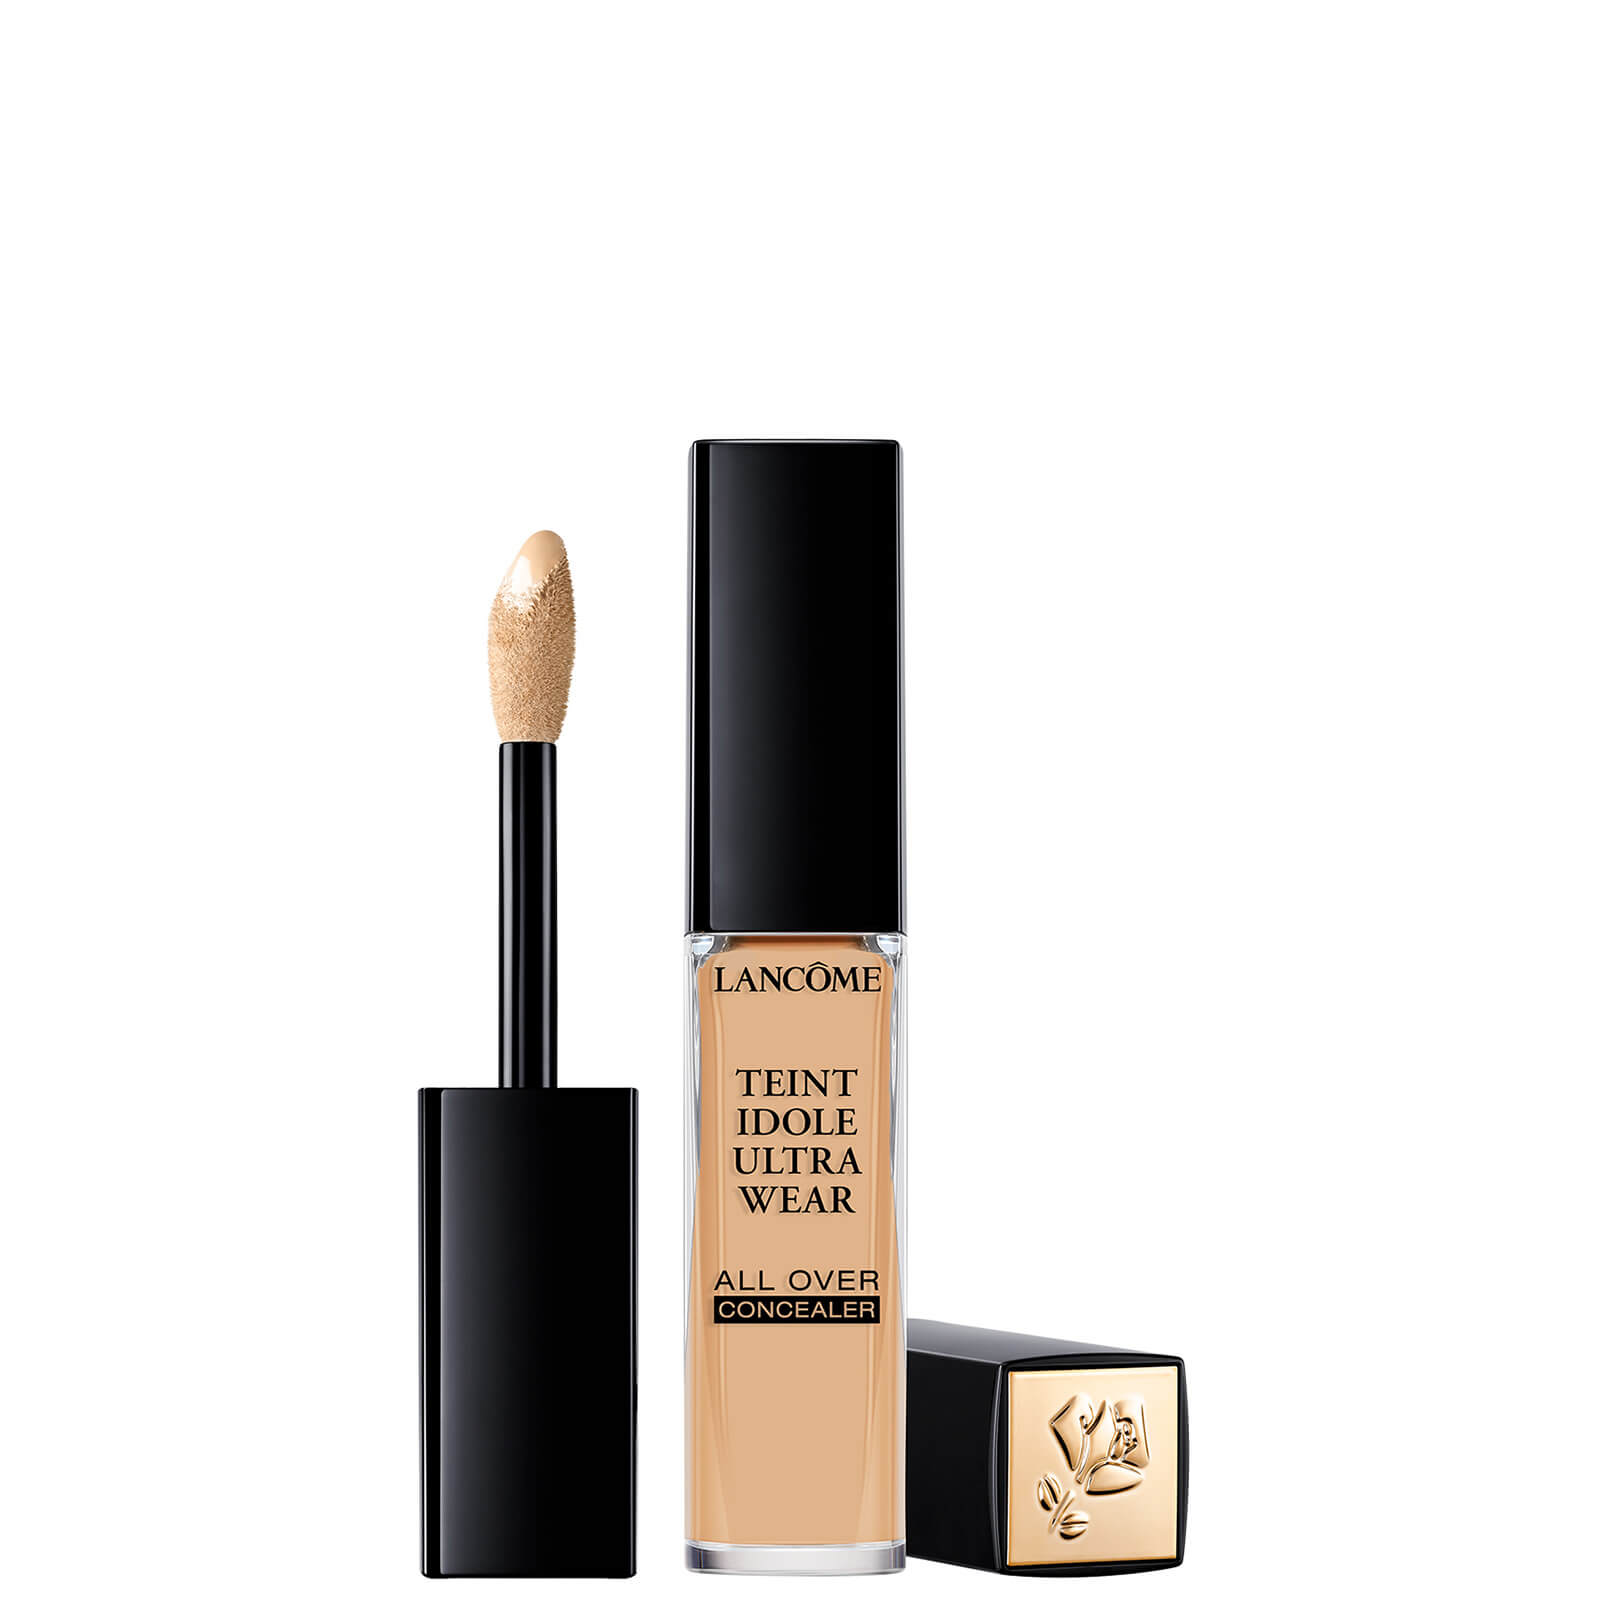 Lancome Teint Idole Ultra Wear All Over Concealer 13ml (Various Shades) - 250 Bisque W 025